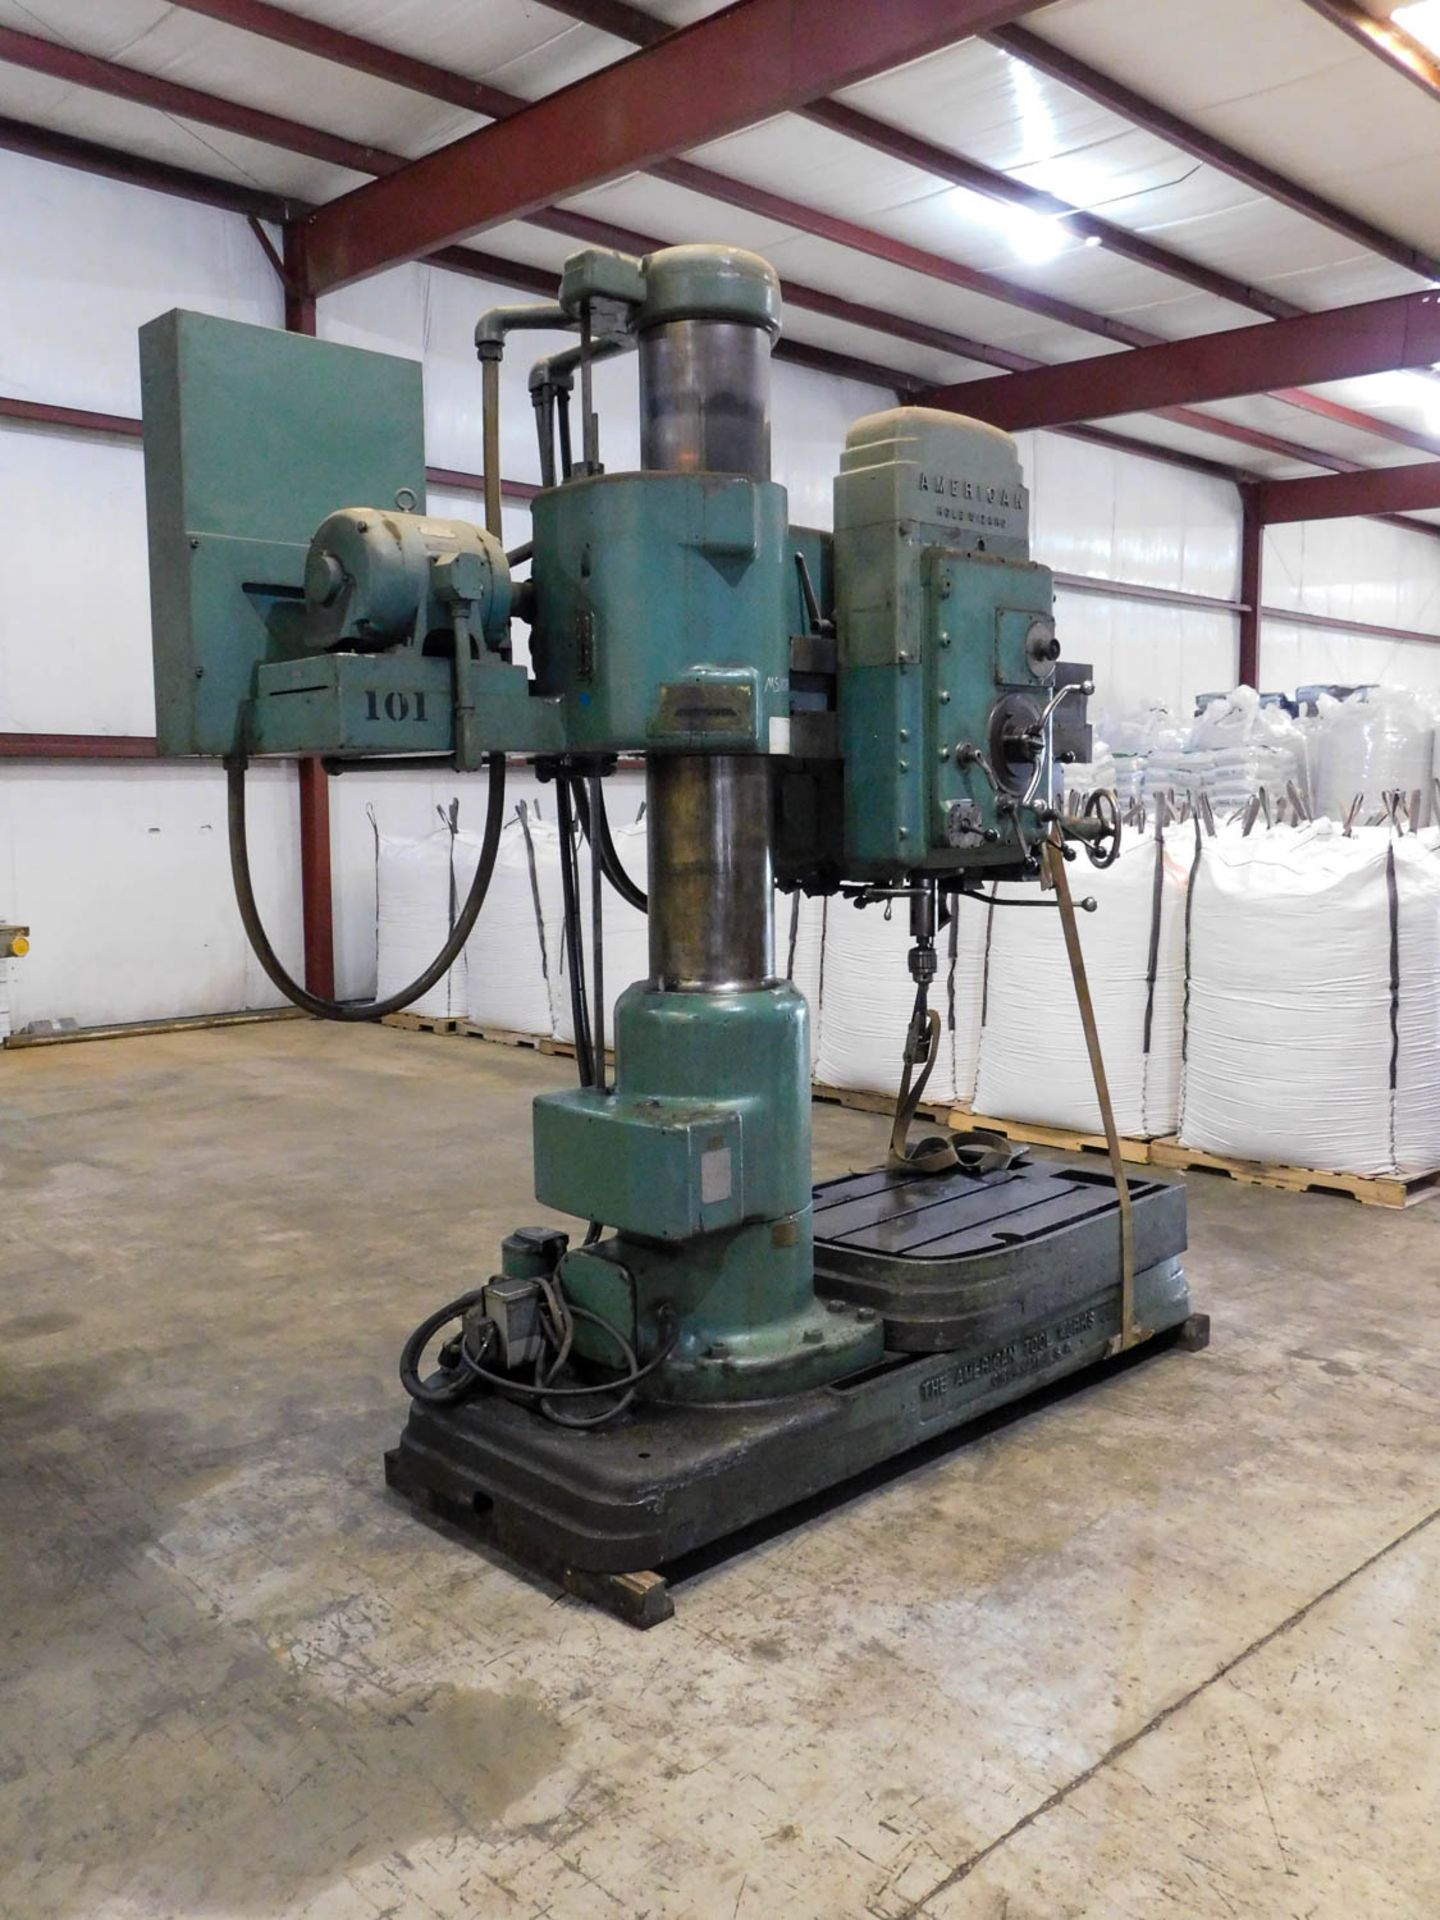 American Hole Wizard 48" Arm Radial Drill - Image 6 of 6